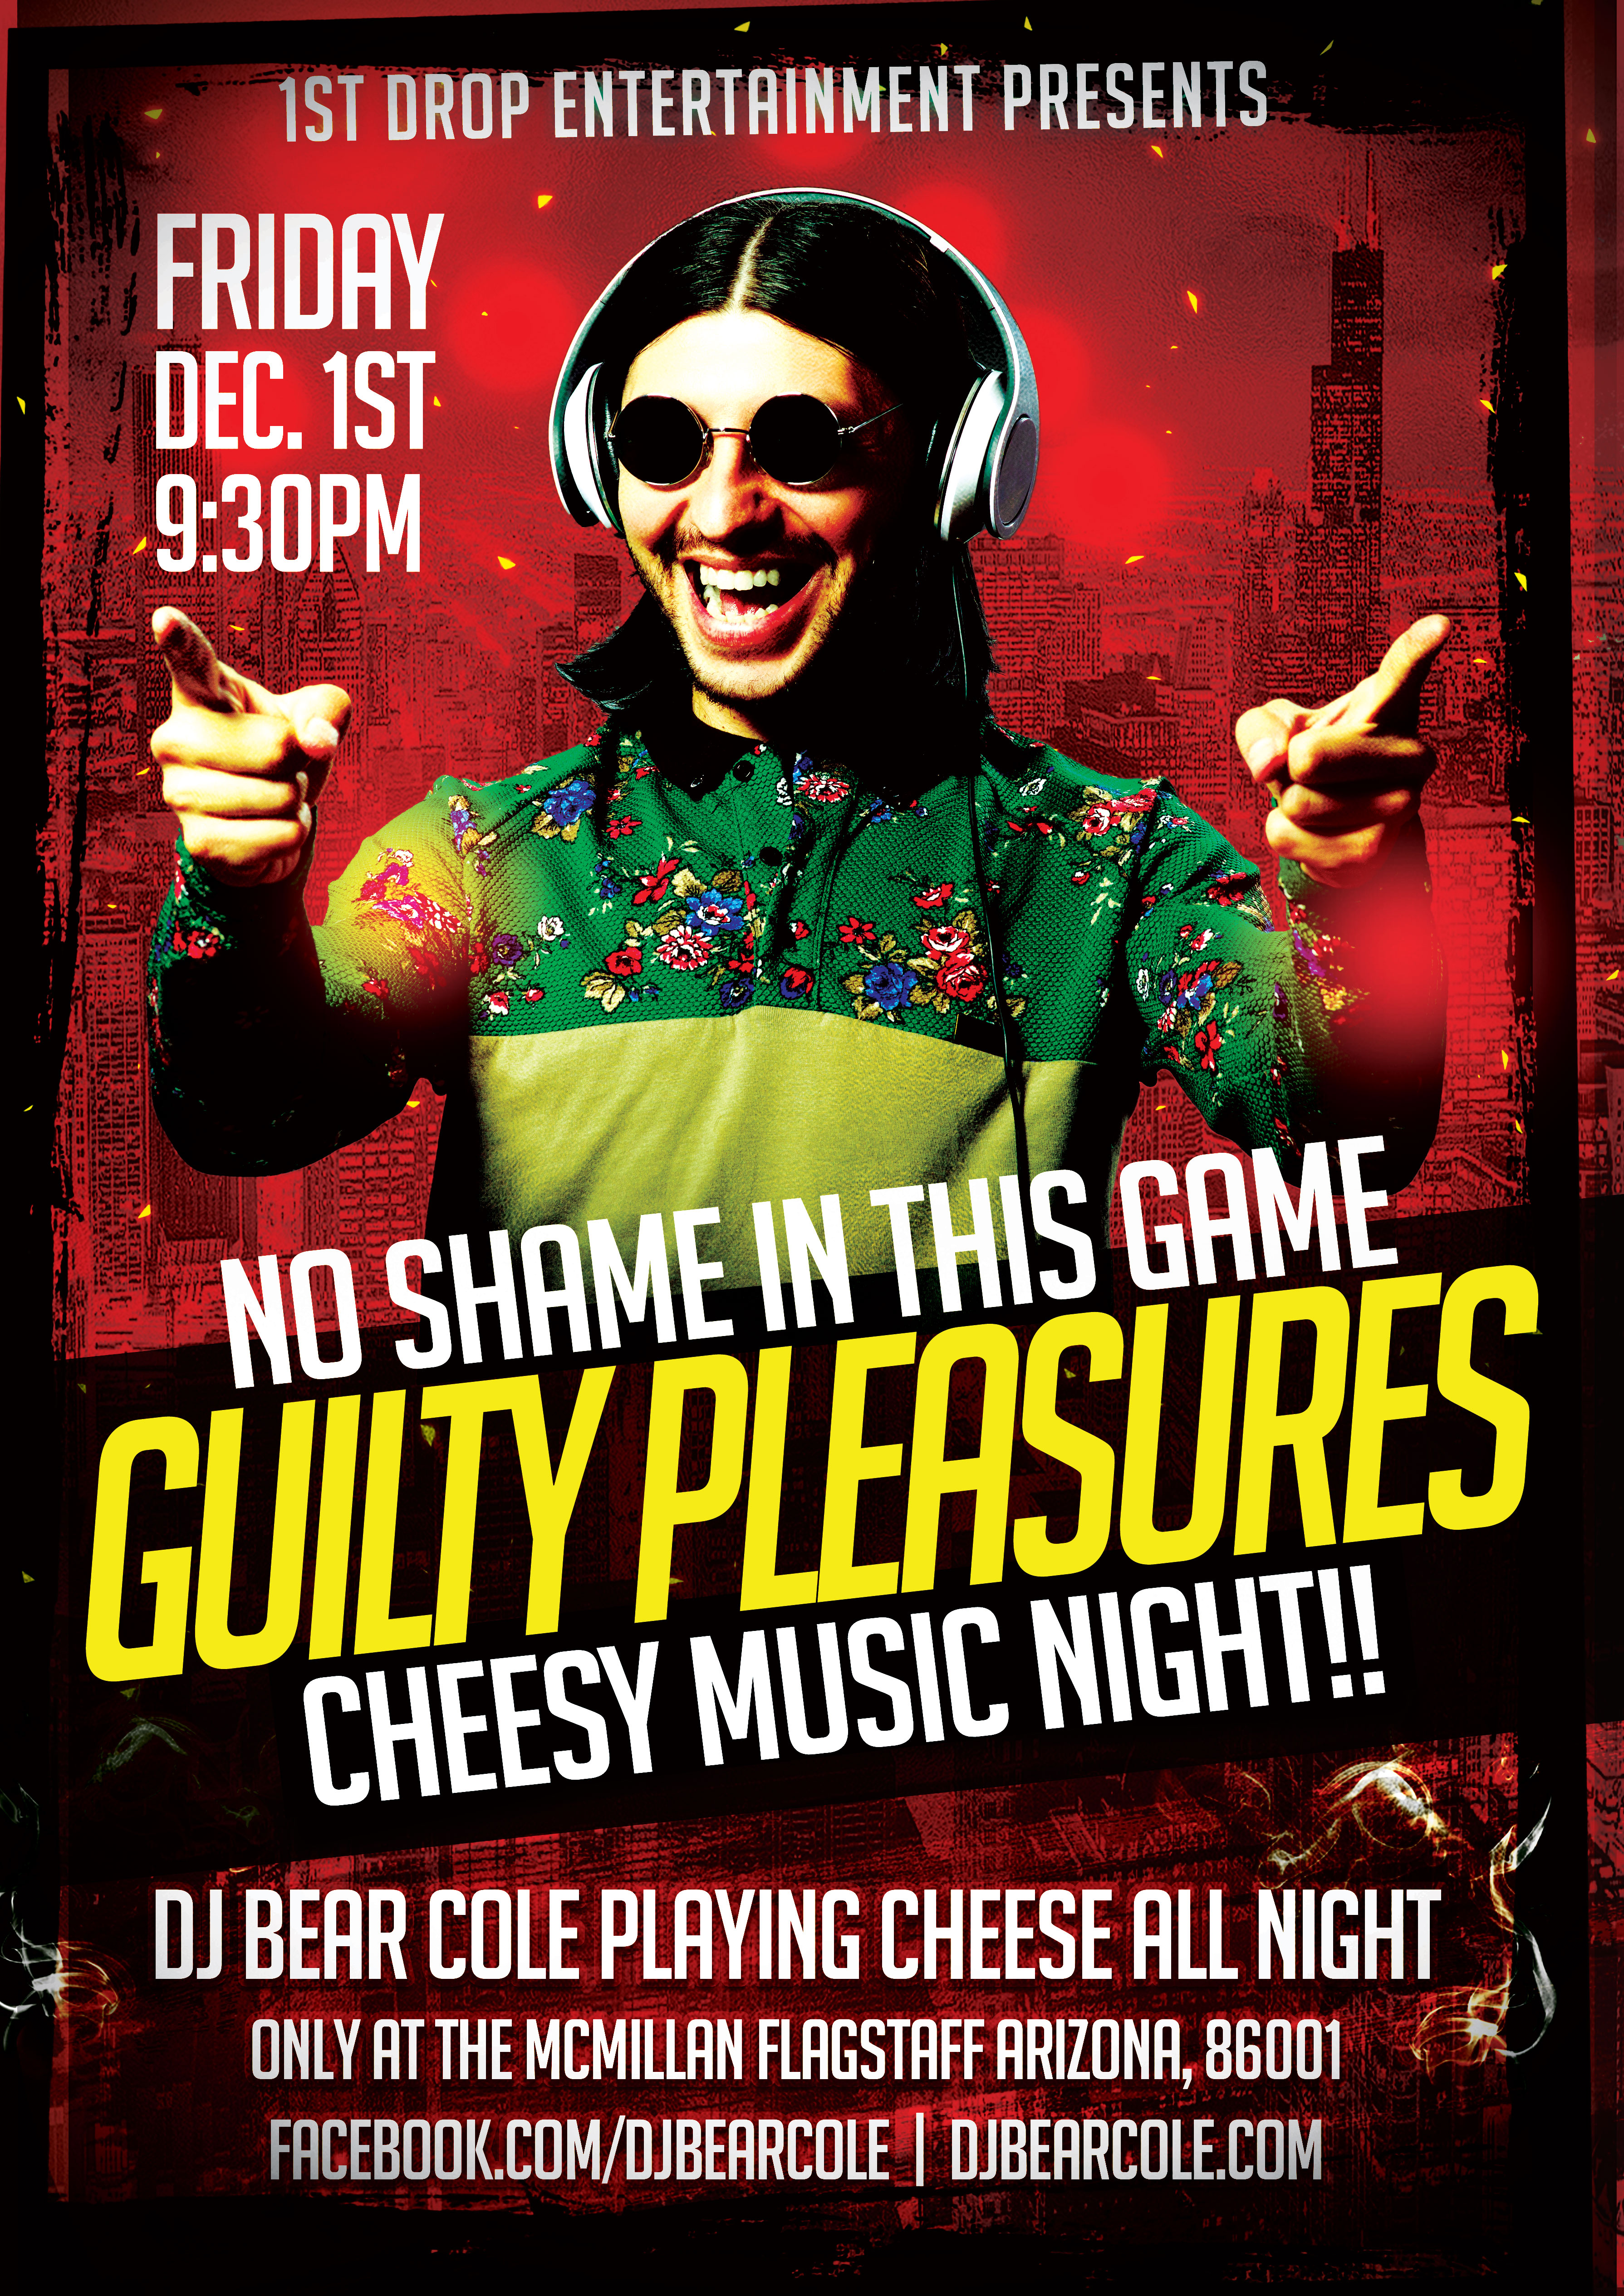 Guilty Pleasures Cheesy Music Night Spotify Playlist Dj Bear Cole Professional Record Selector